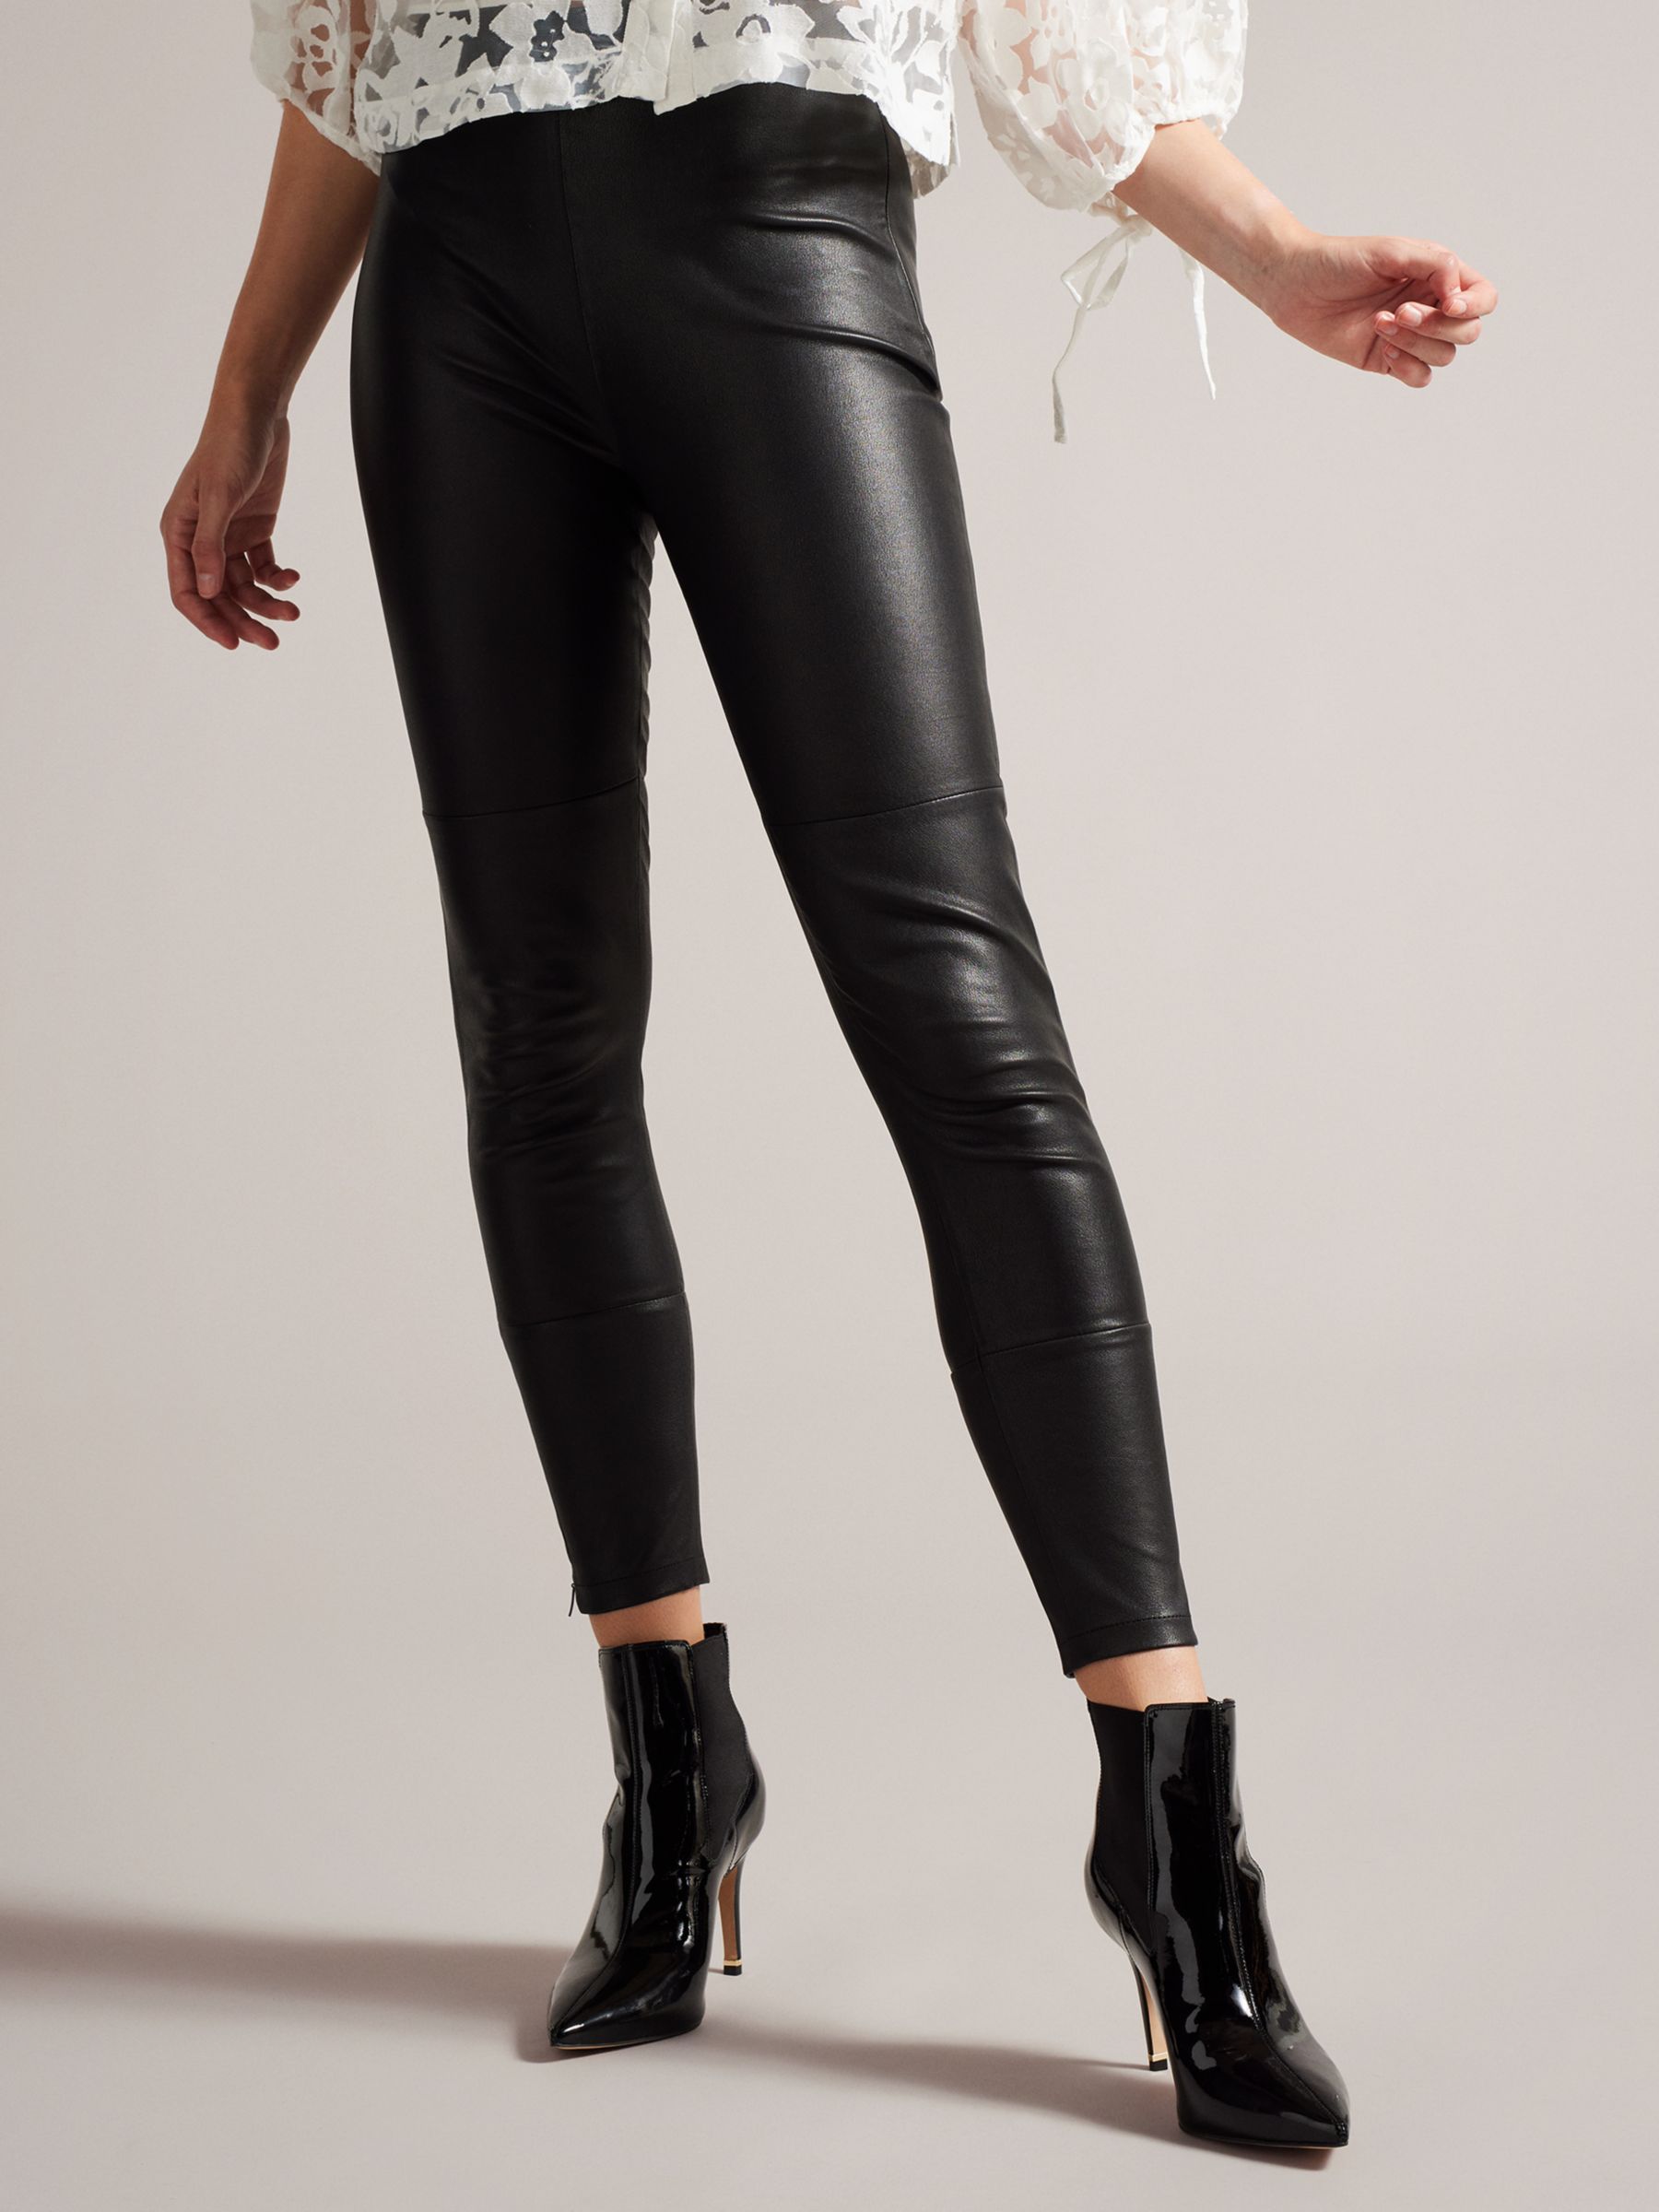 A perfect pair of faux leather high-waisted leggings that you'll be living  in all fall long. Pair them with an oversized sweater or blazer. All black,  of course…